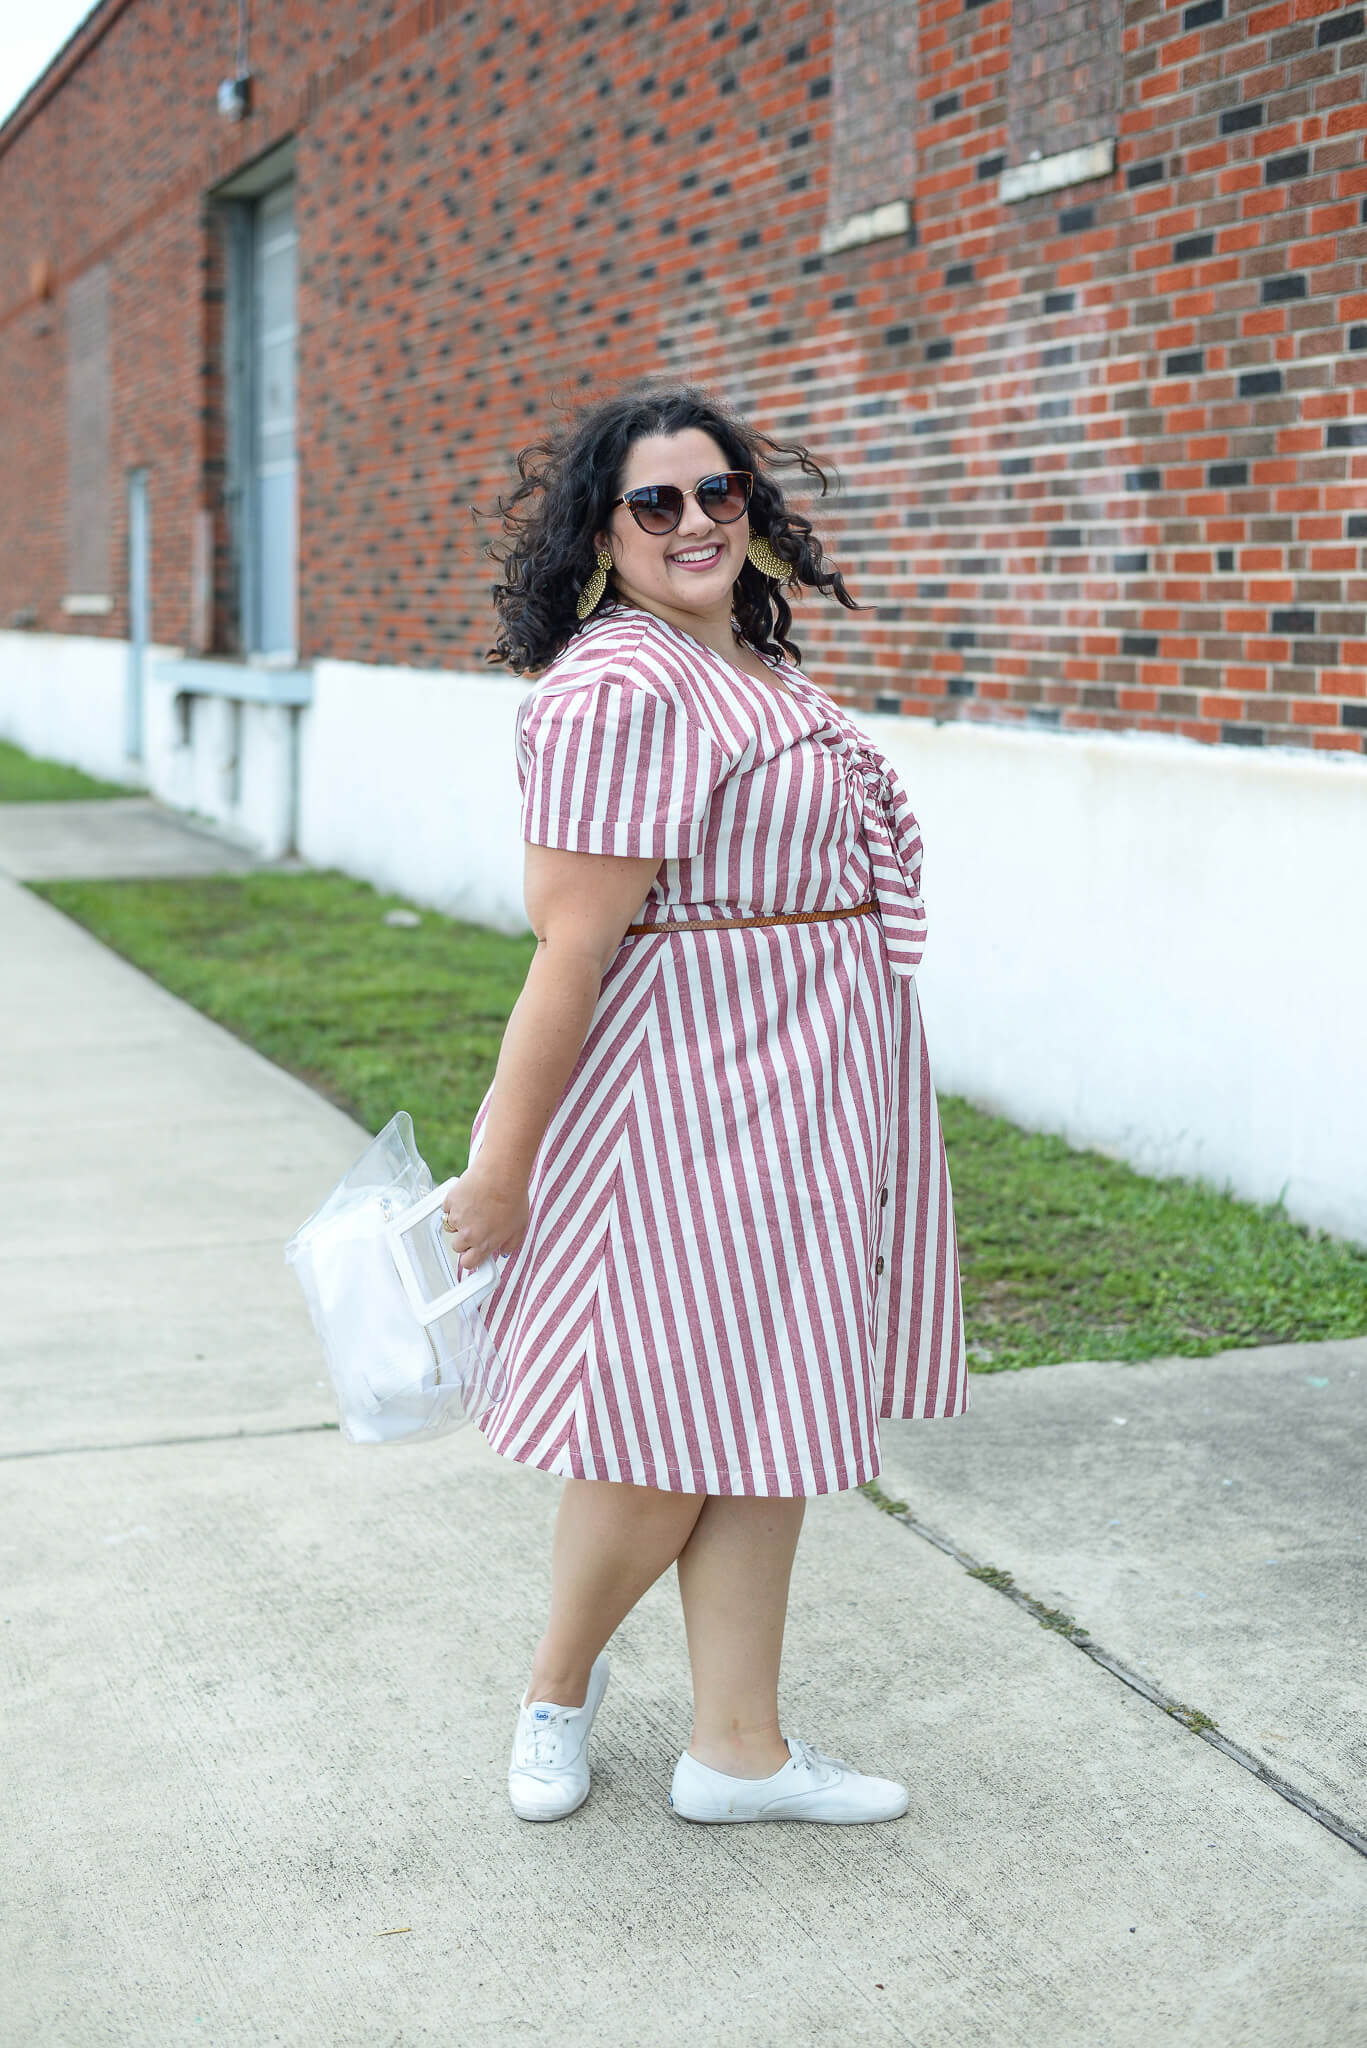 Summer has officially hit Texas and battling the 100+ degree temps can be difficult. Luckily, this striped linen dress from Eloquii helps me to look and feel cool without a lot of effort.